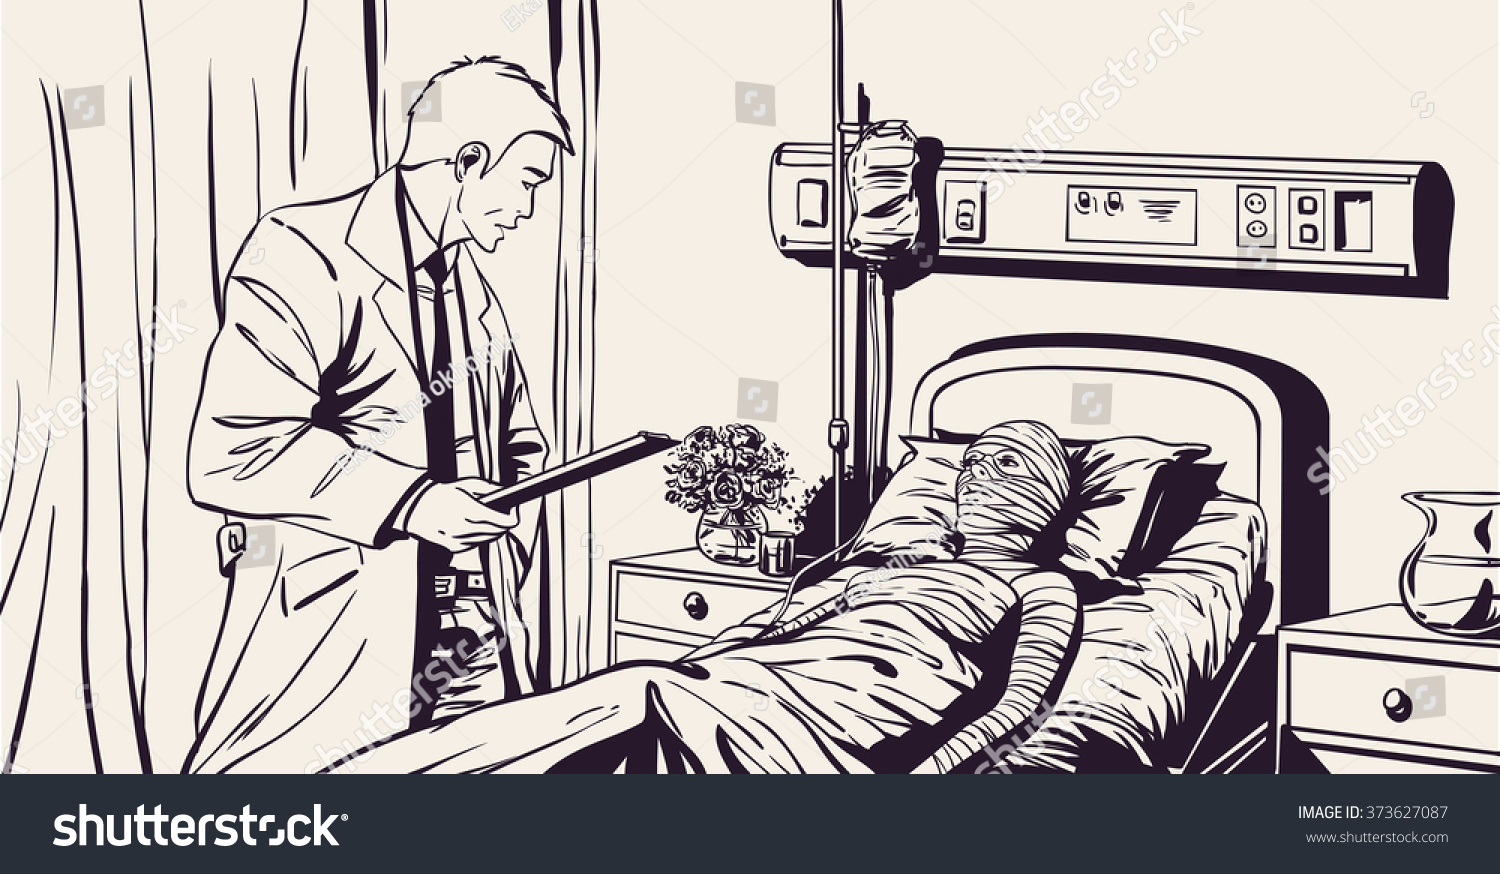 stock-vector-a-doctor-talking-to-a-female-patient-lying-in-hospital-373627087.jpg